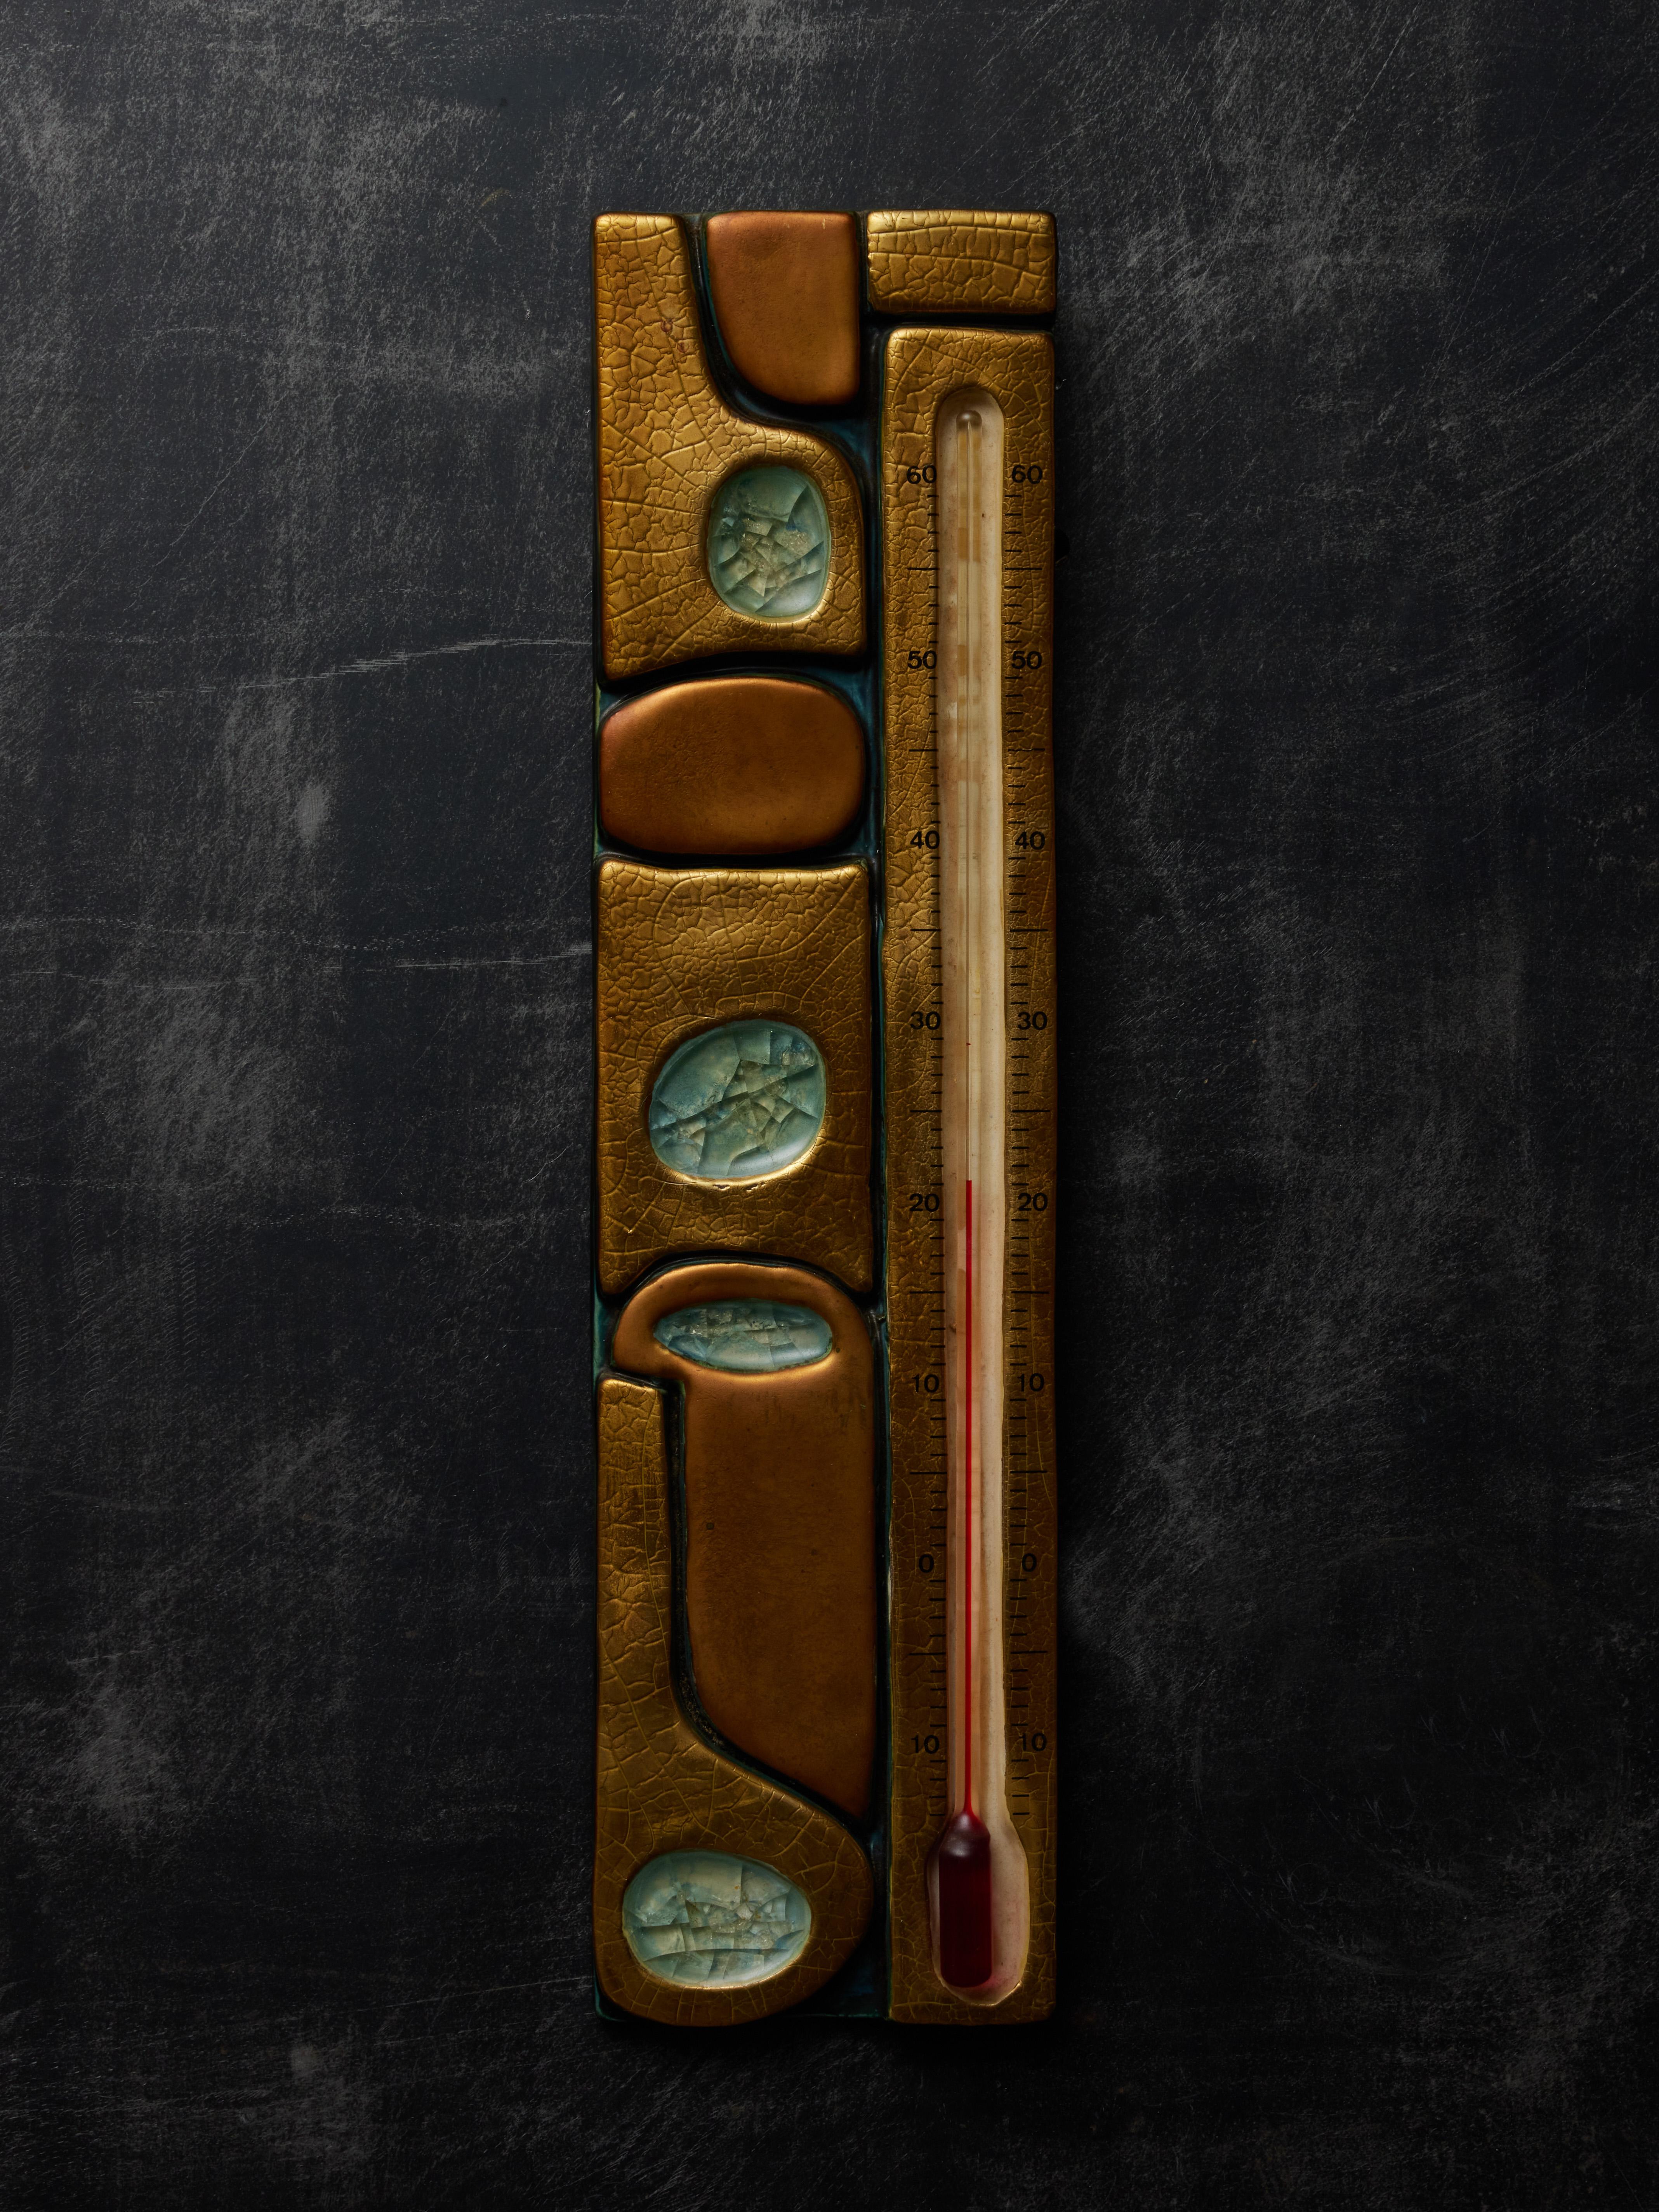 Beautiful wall thermometer in ceramic by Mithé Espelt. Abstract decors with gold glaze and pockets of molten glass

 

Marie Thérèse Espelt, aka. Mithé Espelt (1923-2020)

Born in the town of Lunel, near Montpelier; Mithé Espelt began her career in